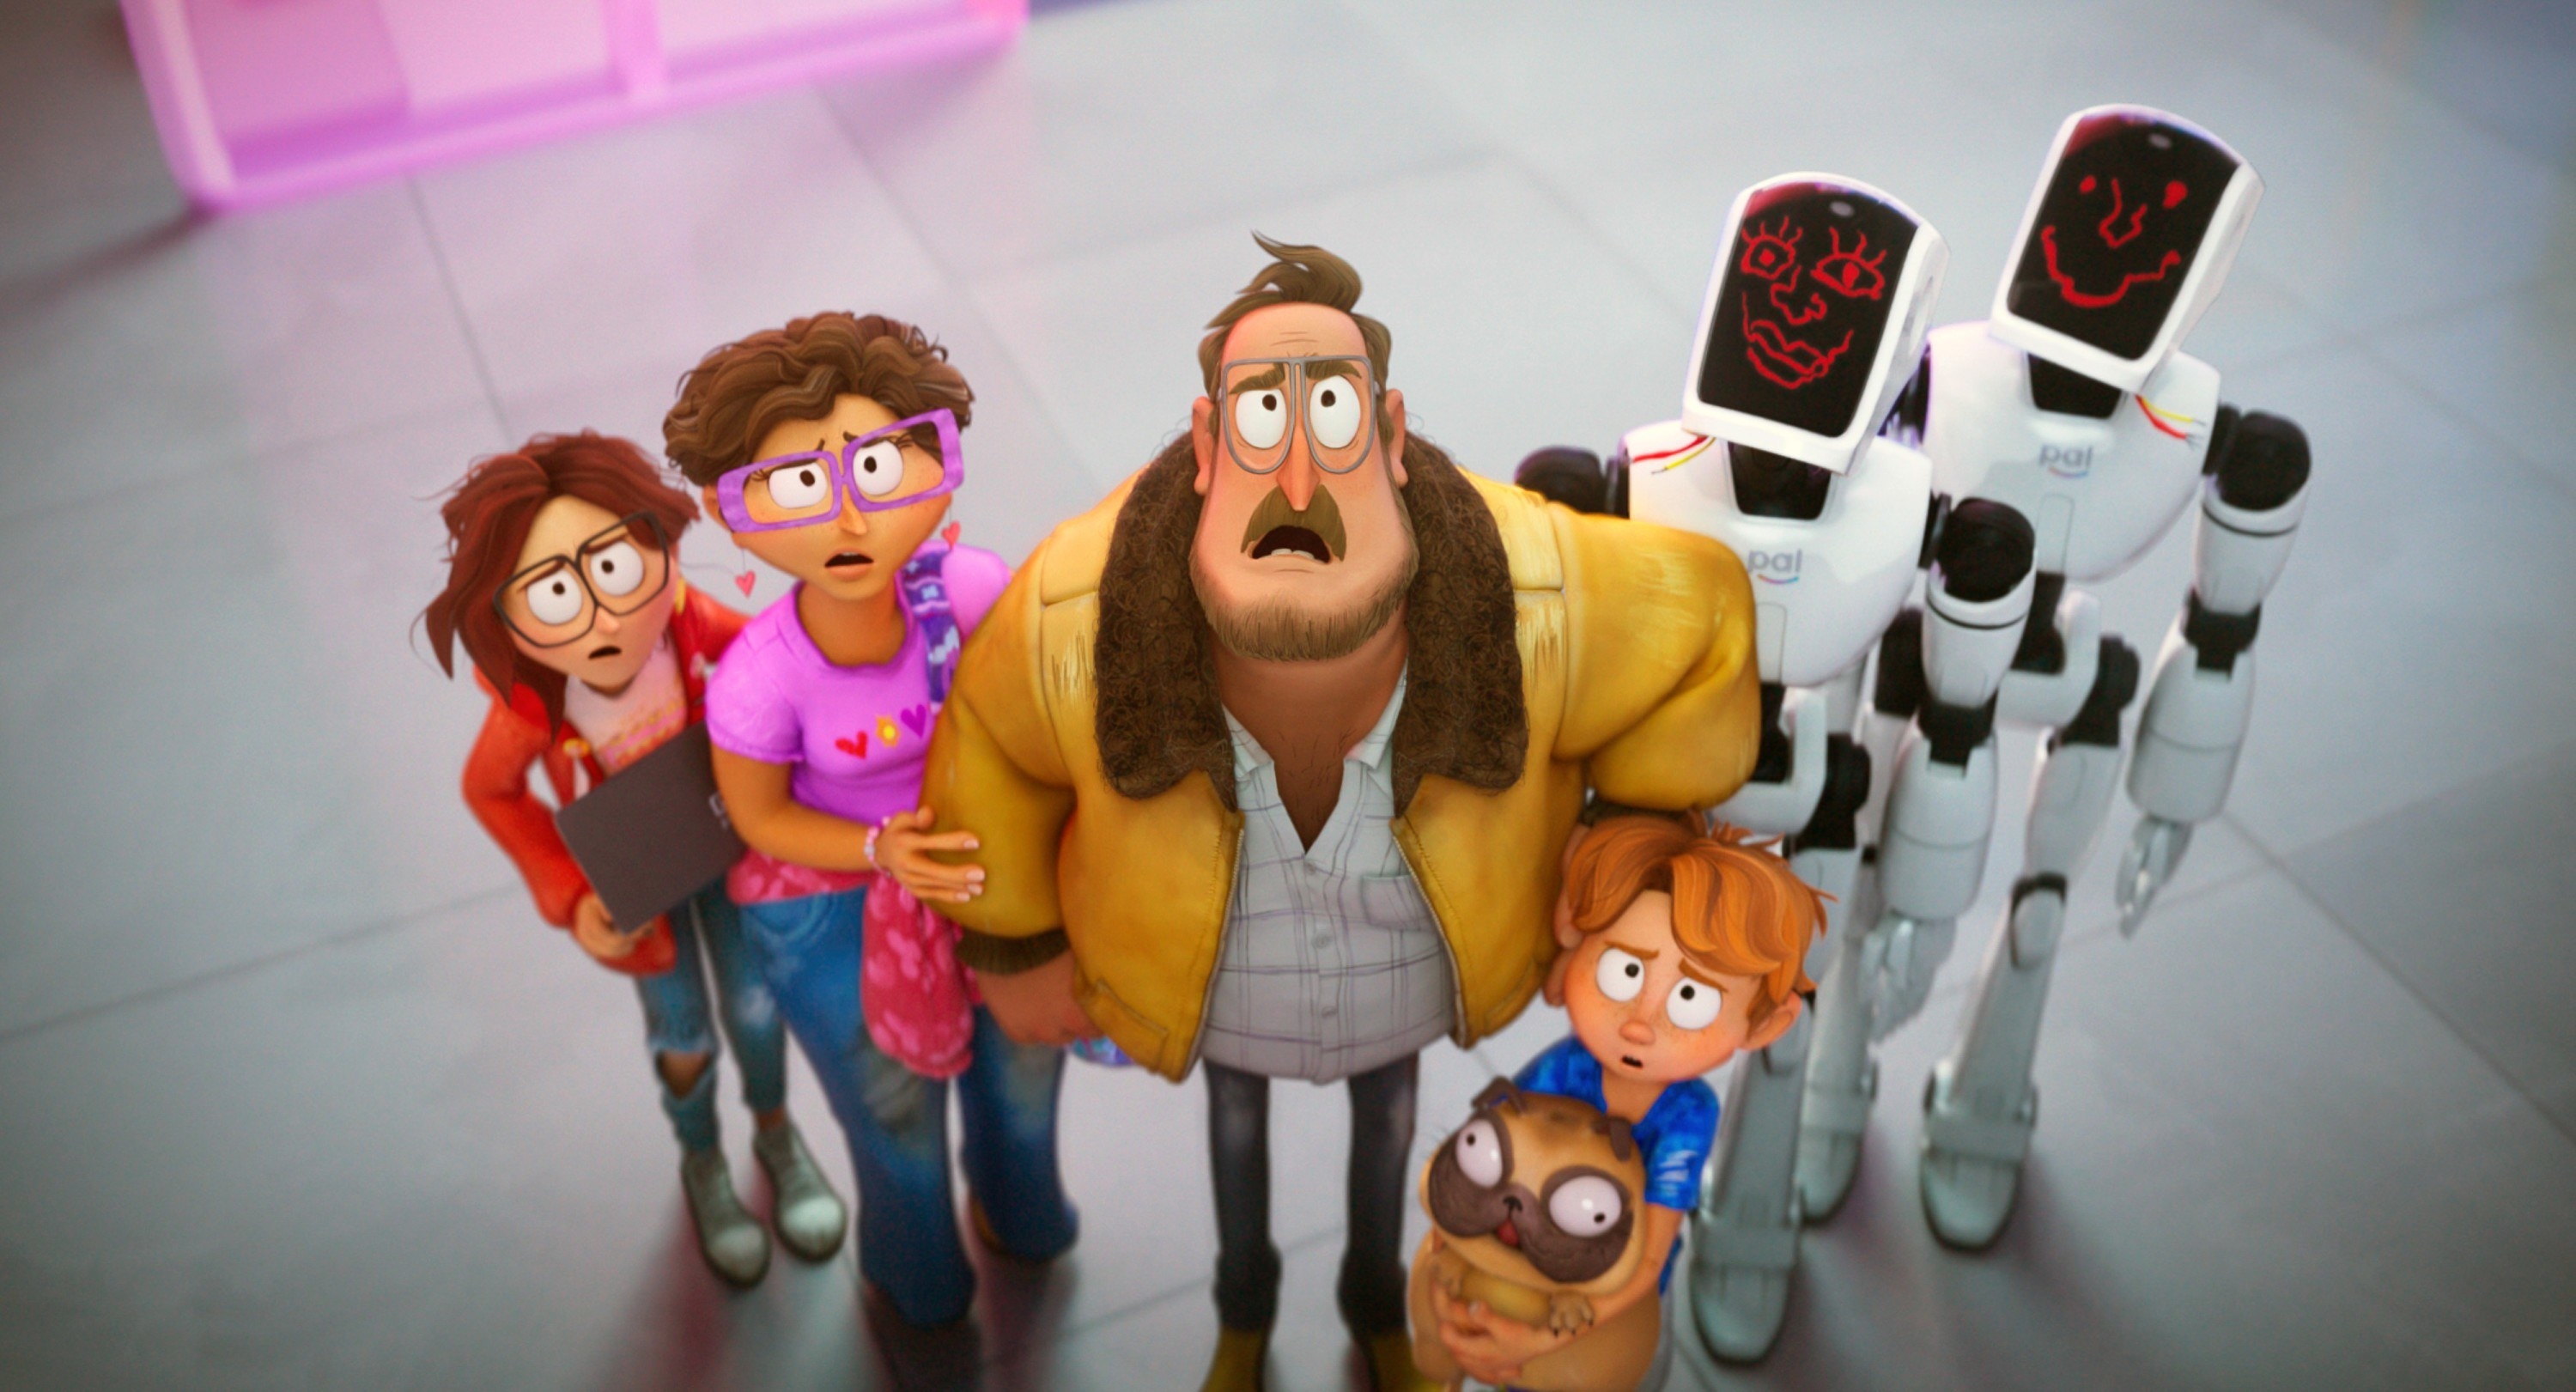 The animated characters voiced by Abbi Jacobson, Maya Rudolph, Danny McBride, Doug the Pug, Mike Rianda, Fred Armisen, Beck Bennett in the animated movie